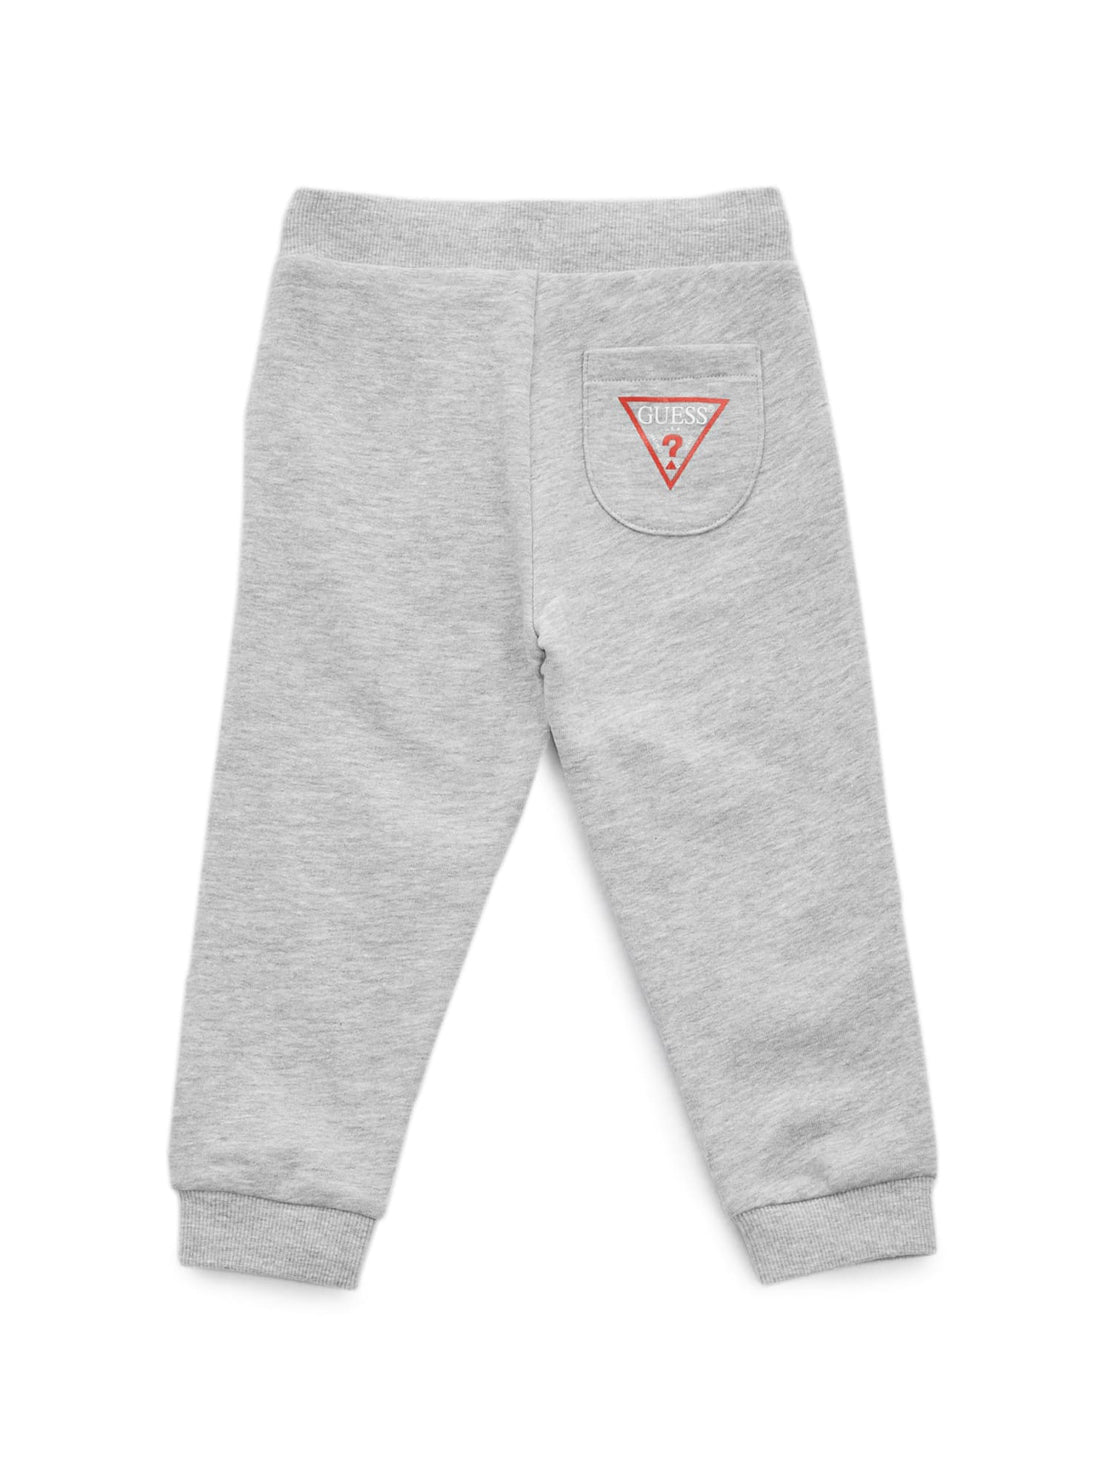 GUESS Little Boys Grey Active Pants (2-7) N93Q17KAUG0 Back View